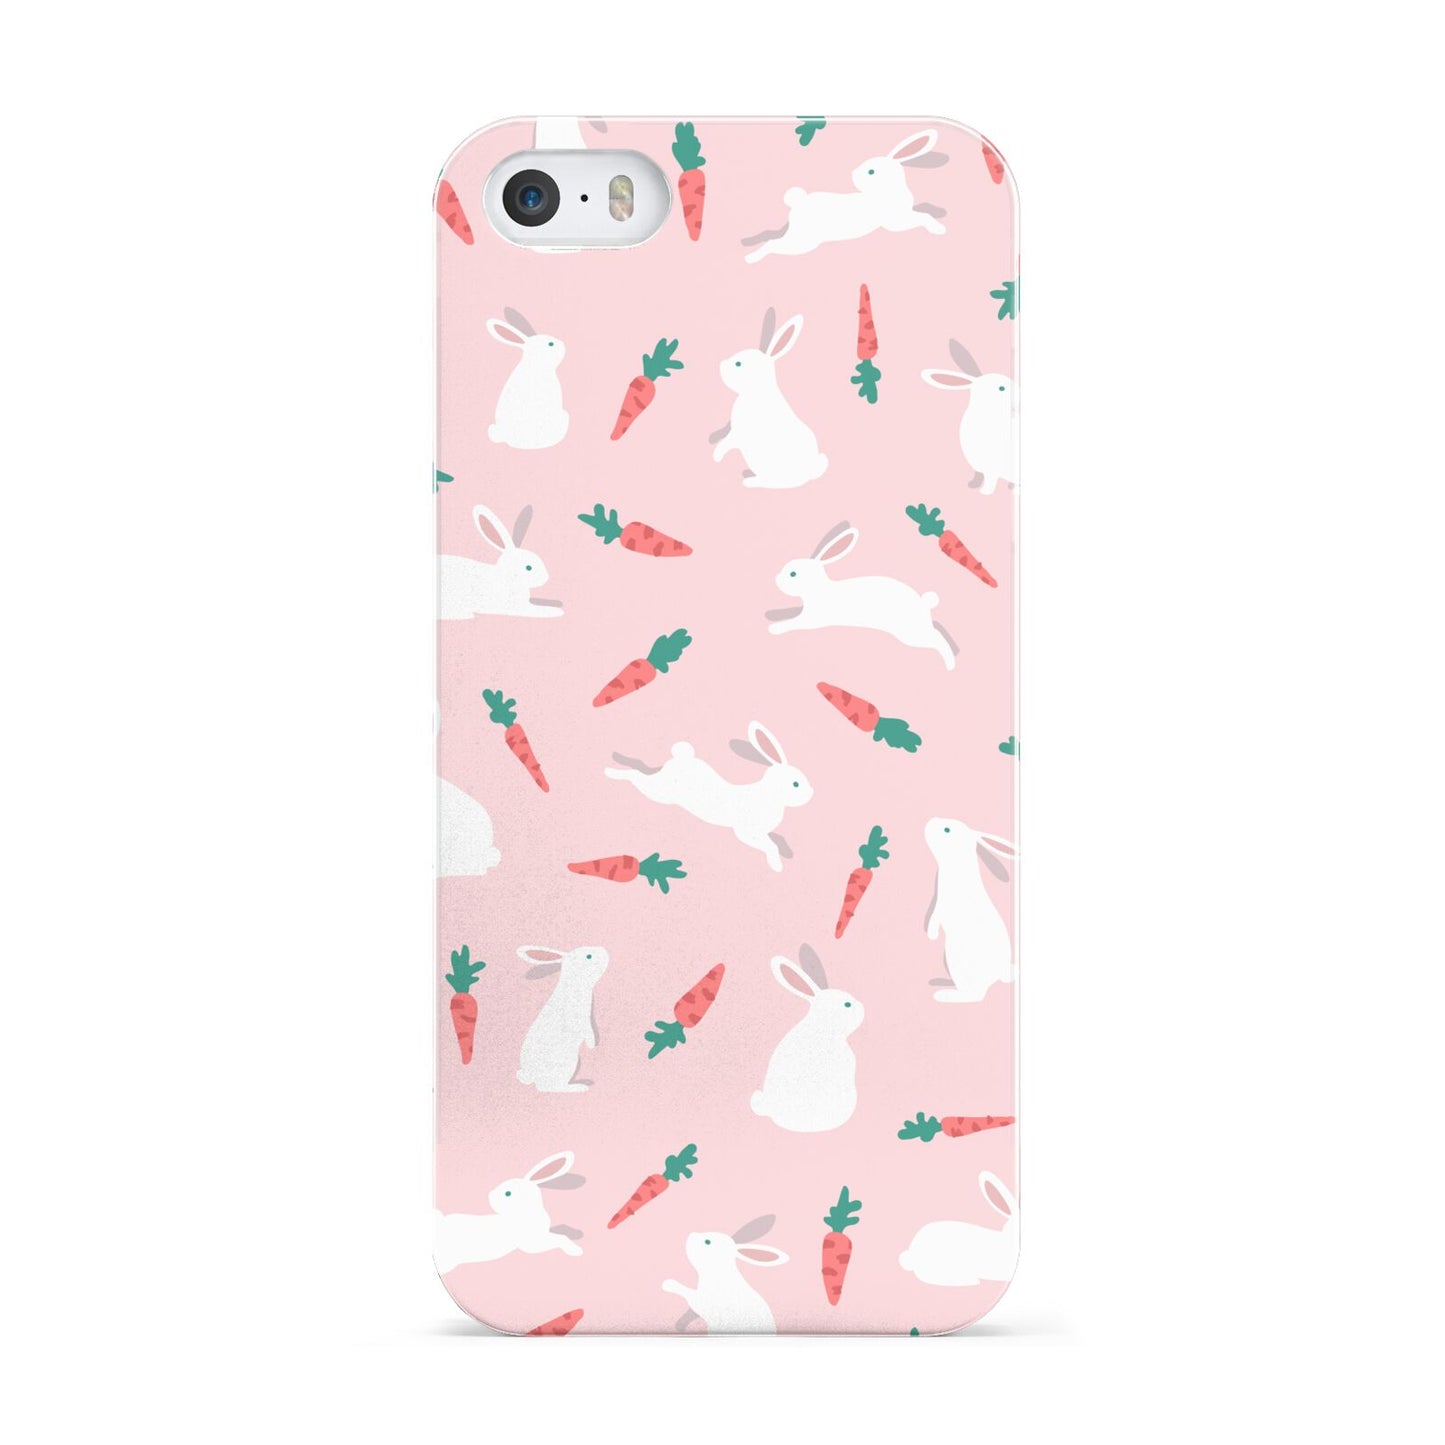 Easter Bunny And Carrot Apple iPhone 5 Case